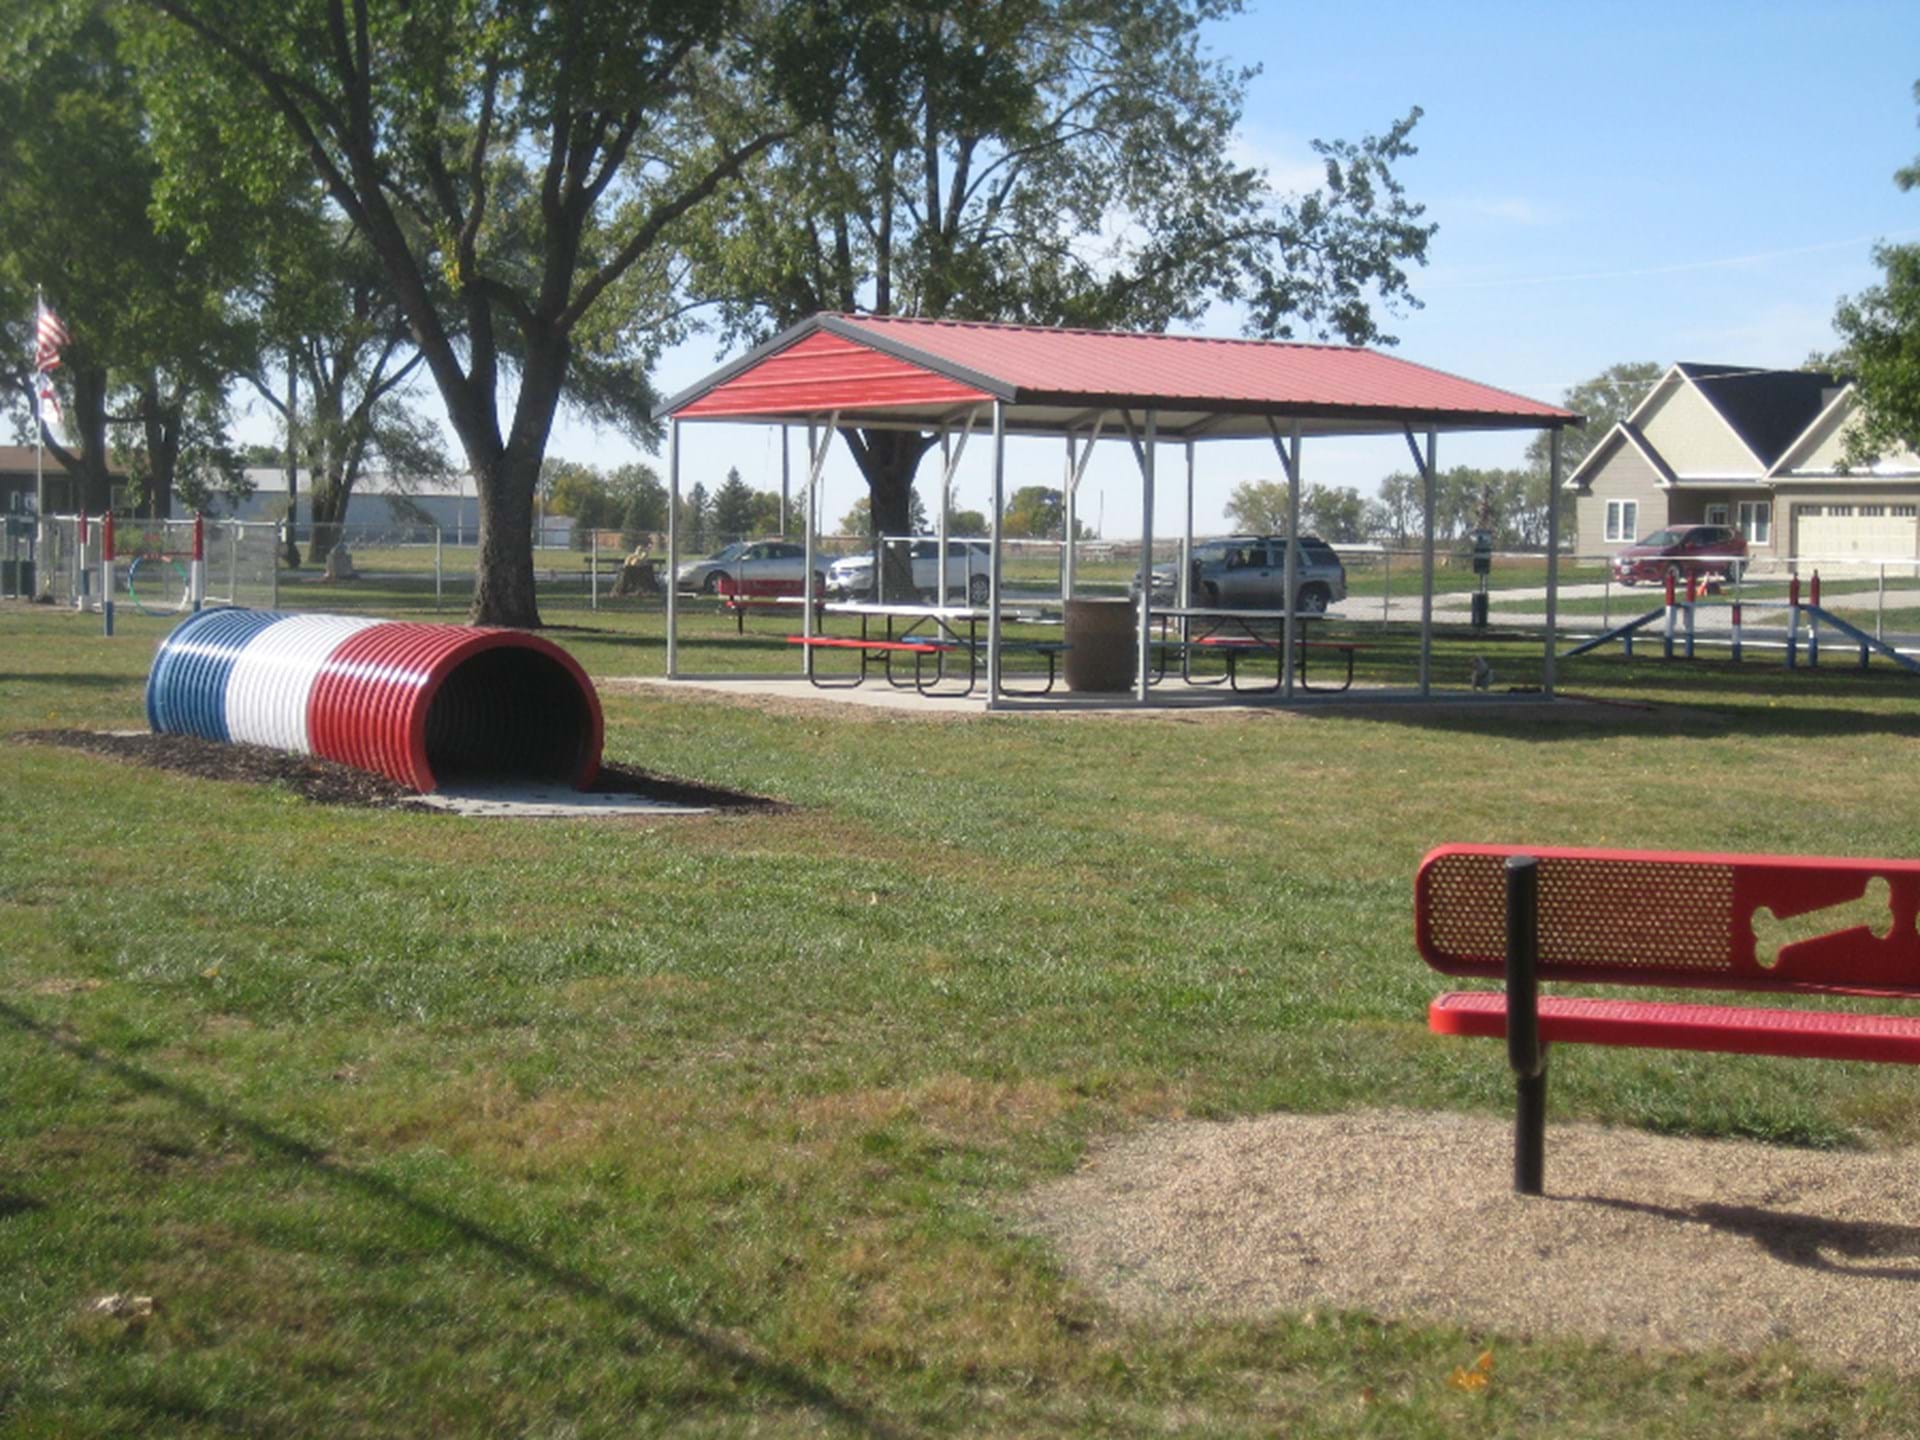 Newly Expanded with Agility Equipment, Picnic Shelter